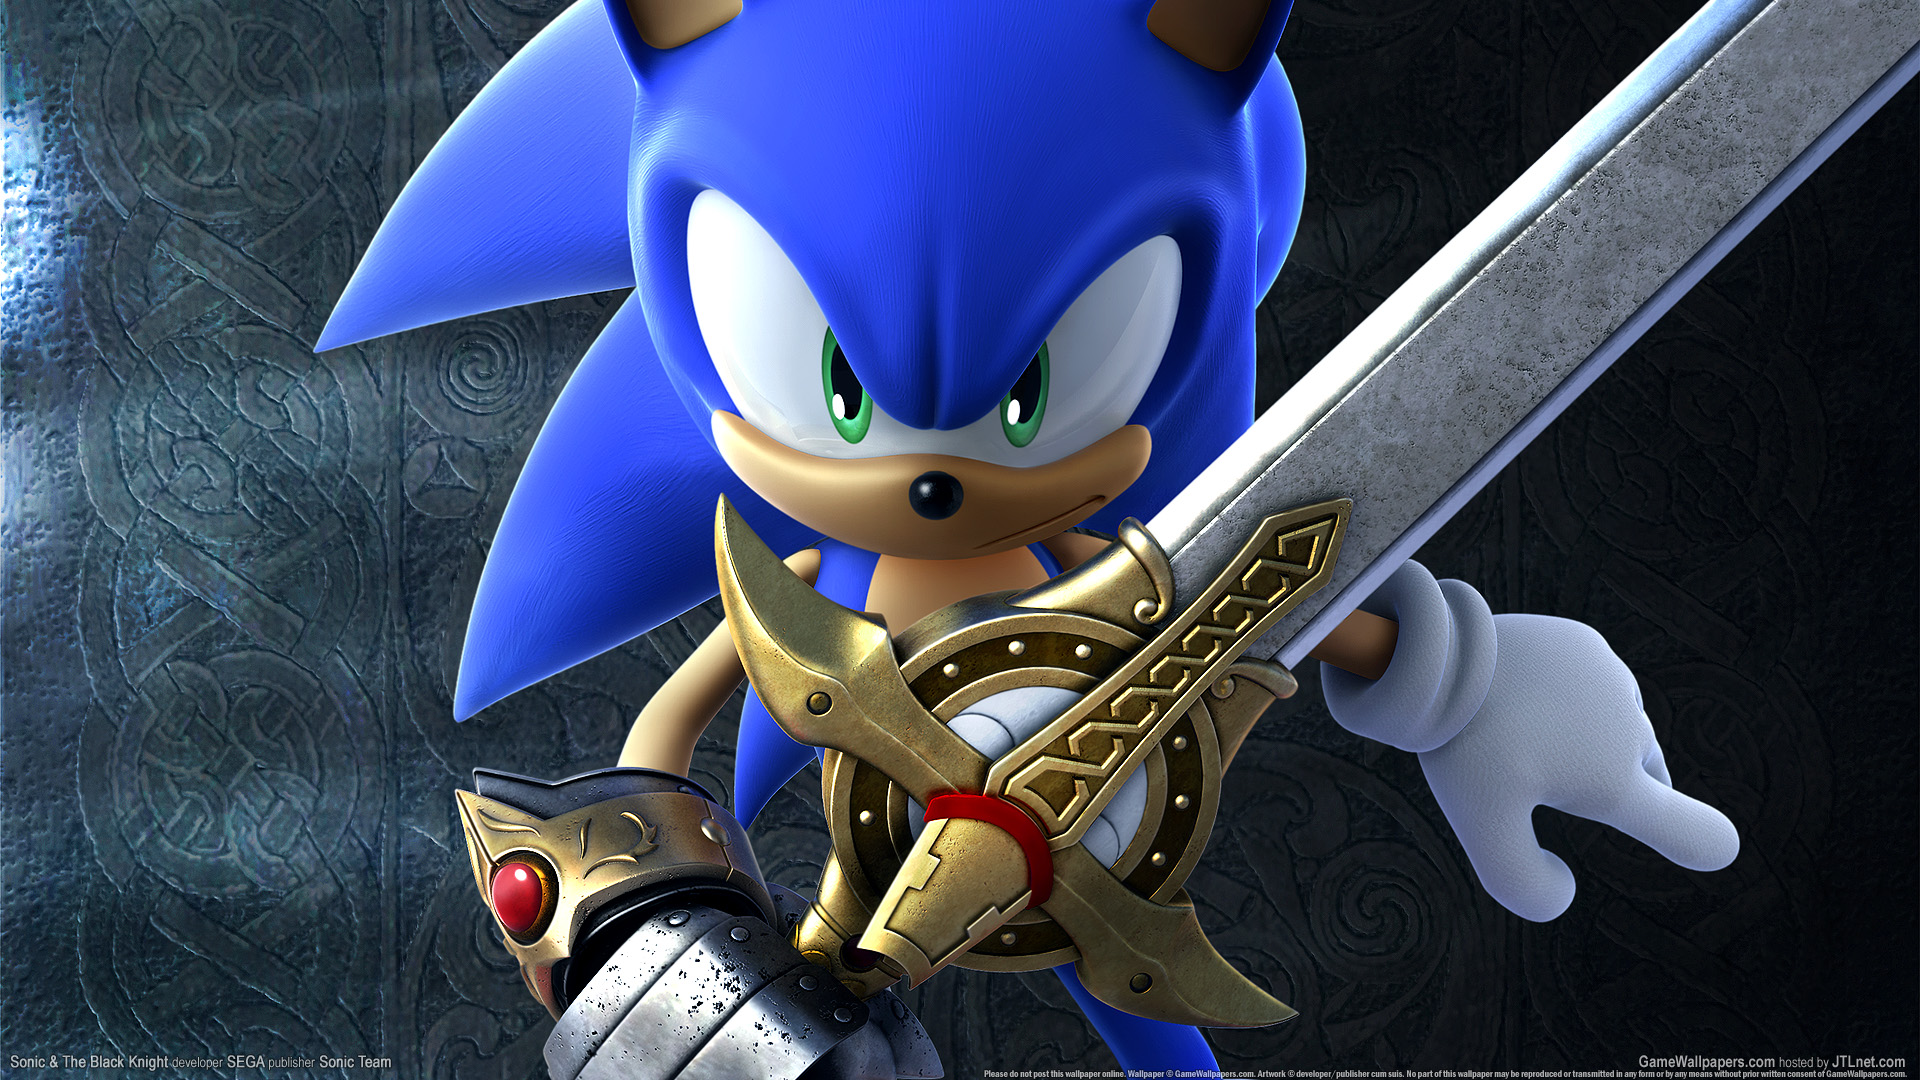 Sonic & The Black Knight achtergrond 01 1920x1080